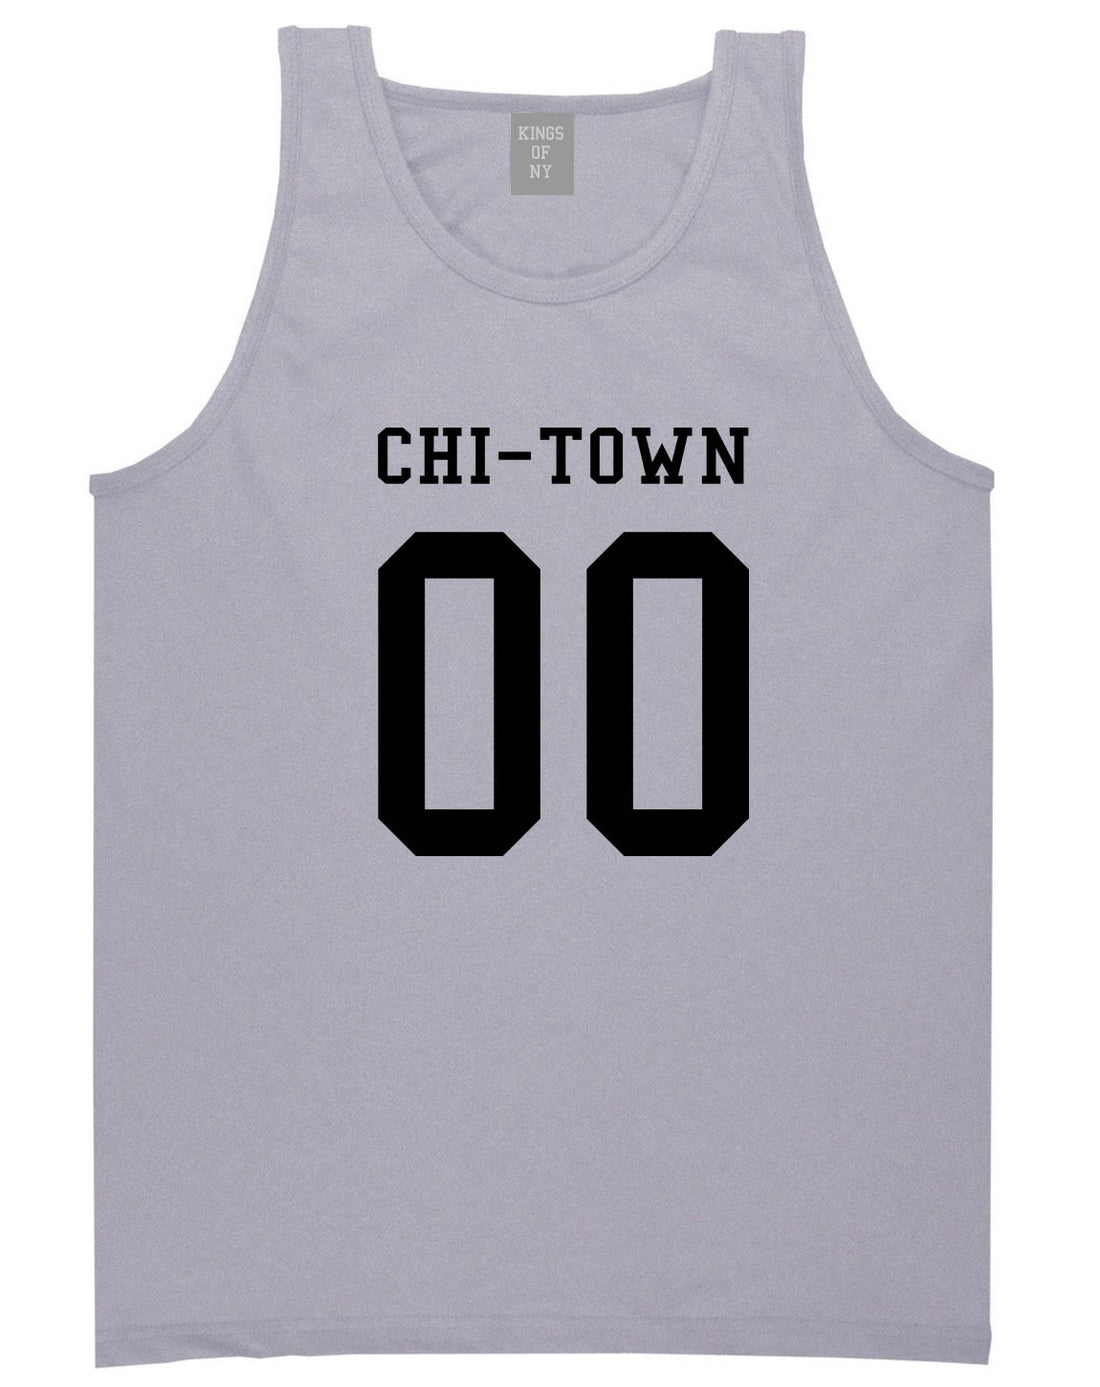 Chitown Team 00 Chicago Jersey Tank Top in Grey By Kings Of NY